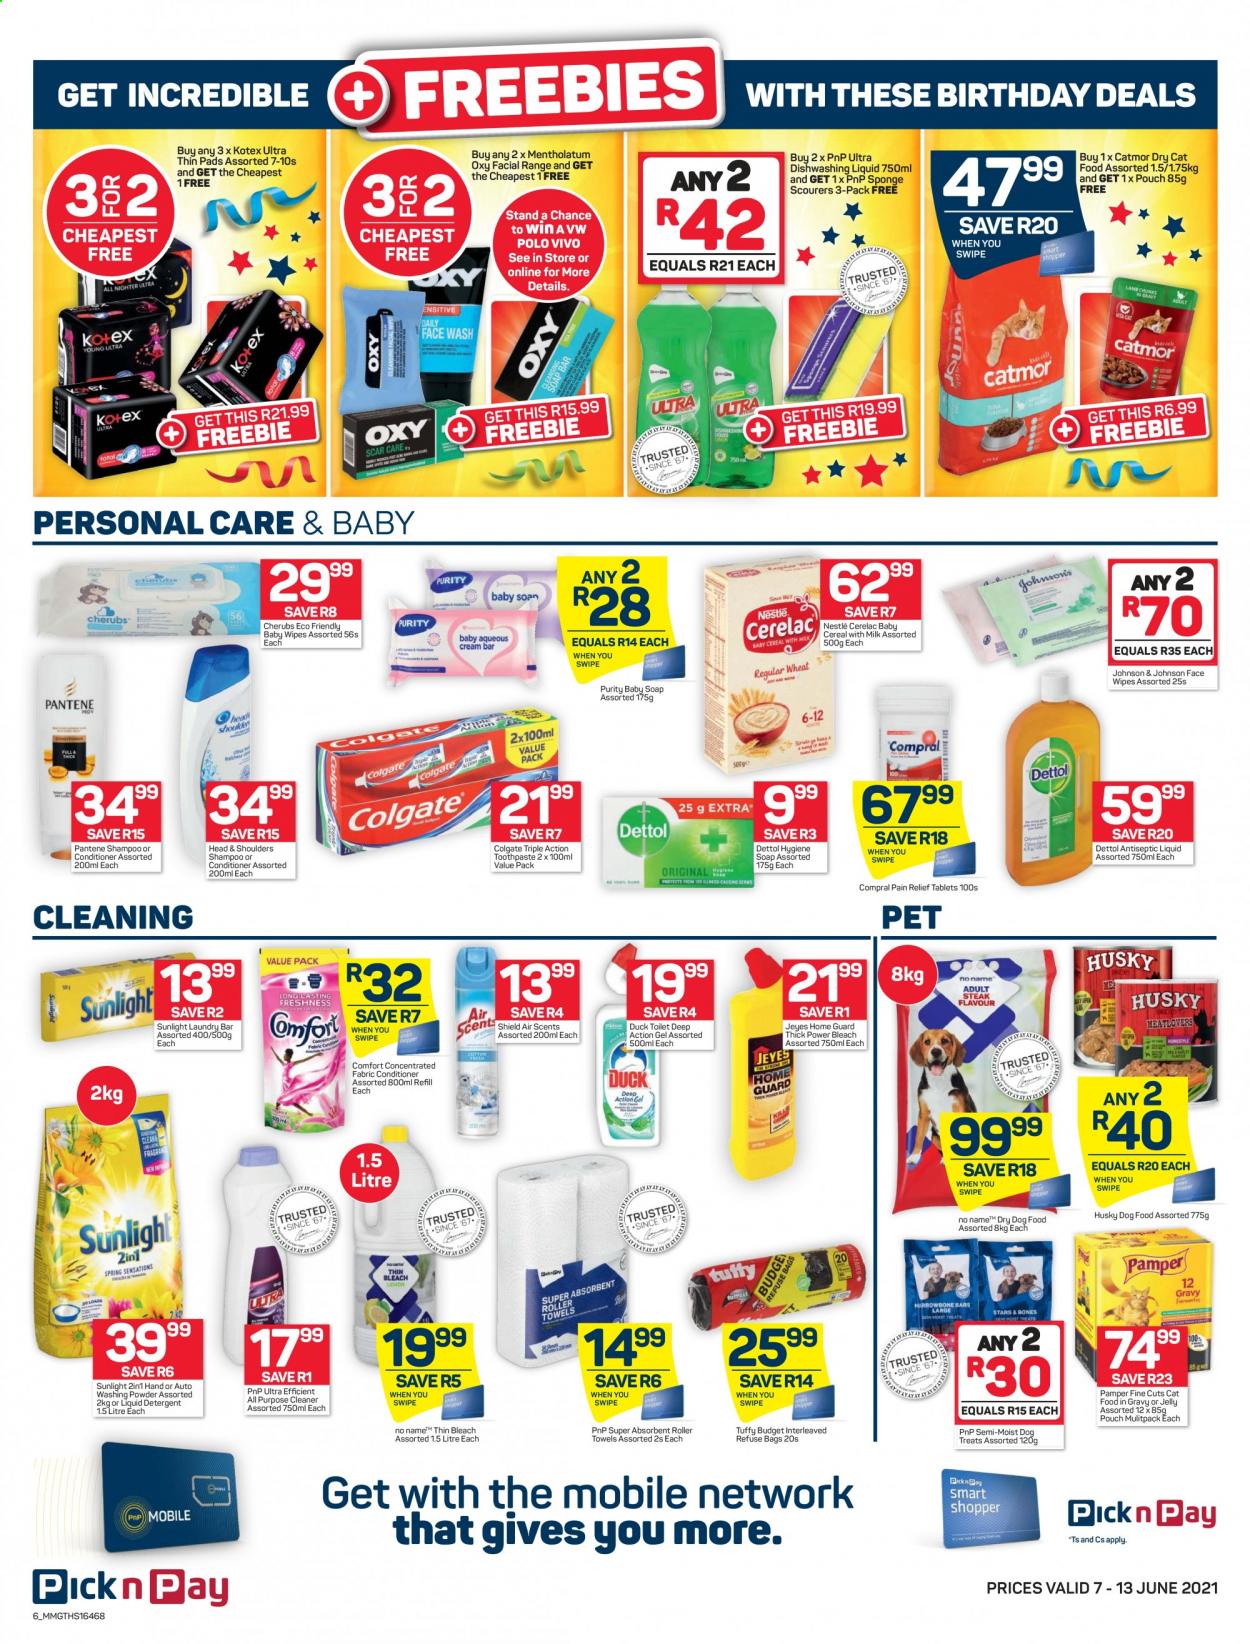 Pick n Pay specials - 06.07.2021 - 06.13.2021. 